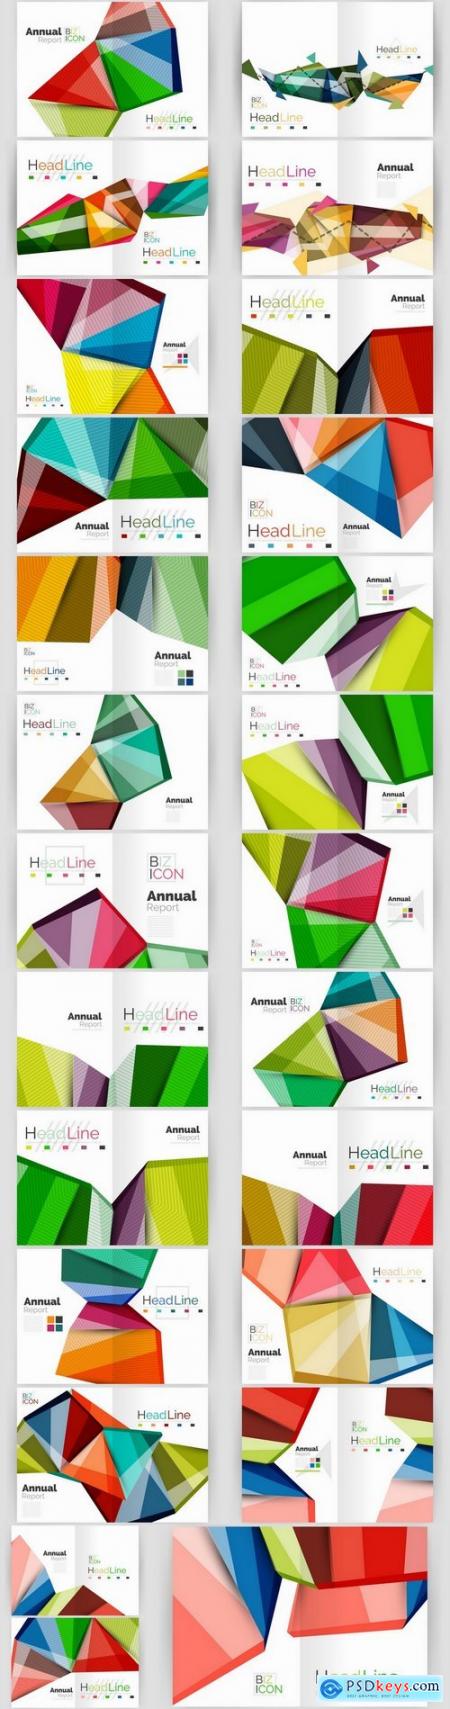 Book carpet abstract template log example flyer banner vector image 5-25 EPS